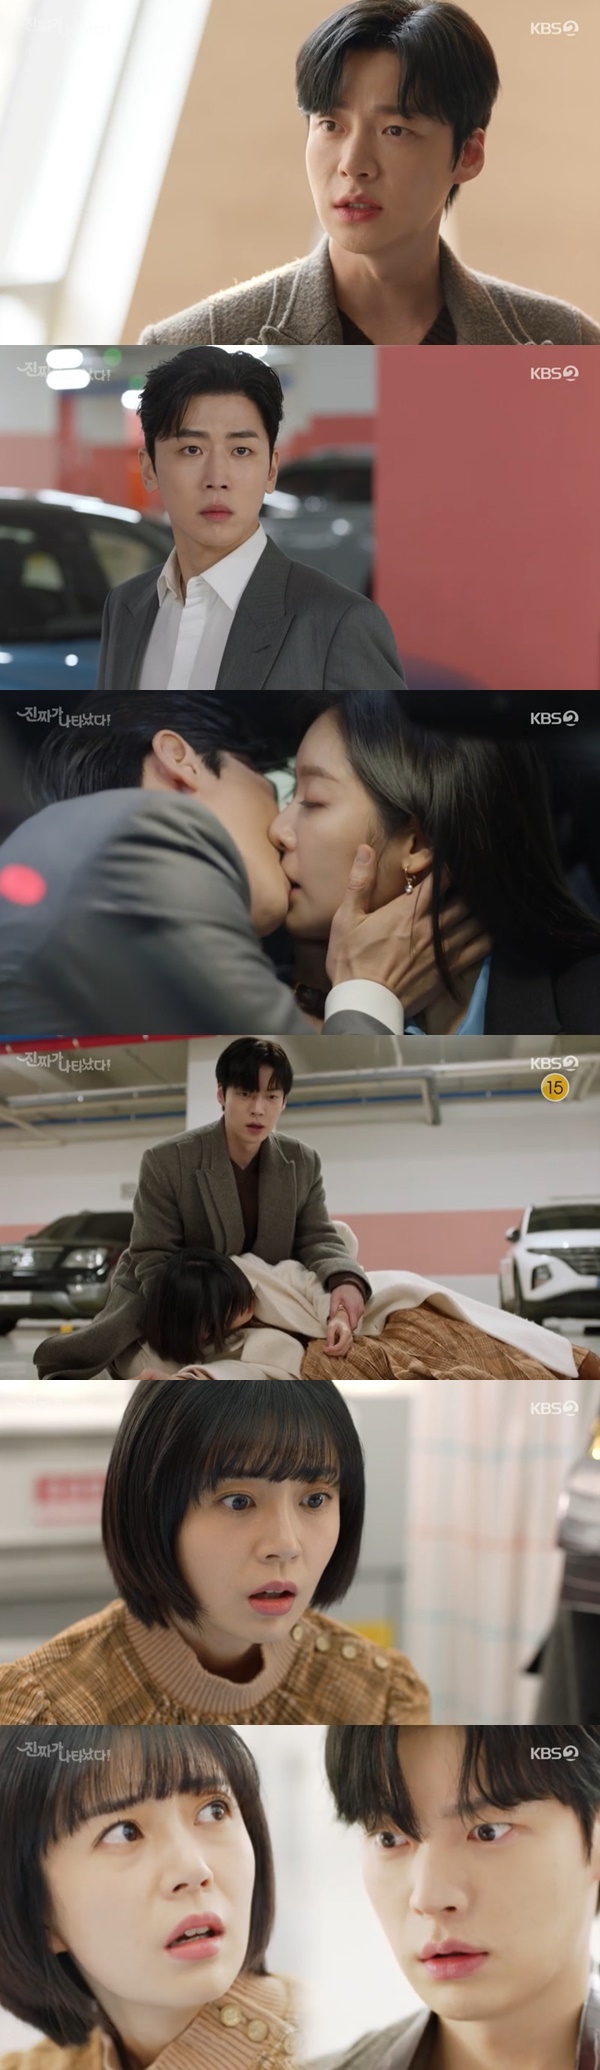 Cha Joo-Young wants a marriage with Ahn Jae-hyun and has a final kiss with Justice.On March 25, the first broadcast of KBS 2TVs new weekend, Drama  The Real One Has Appeared!! ⁇  (playwright Cho Jung-joo / director Han Jun-seo), Oh Yeon! Two (Baek Jin-hee), coma (Ahn Jae-hyun), Jang Se-jin (Cha Joo-young) and kim jun-ha (justice maker) began a full-fledged relationship.Oh Yeon, a popular full-time lecturer who will soon become a lecturer, has been advised by the director to dream of rabbits and to do marriage before becoming a lecturer.Oh Yeon! I was impressed by the hotel event prepared by my lover kim jun-ha, but the initials on the cake were SJ Oh Yeon!Oh Yeon! Two threw the cake into the face of kim jun-ha and parted and Doodle called Flirt in kim jun-has car.I was offered a proposal to Bae Suzy, an announcer lover, but refused because of non-marriage.Bae Suzy doubted the comas non-marriage and finally believed that Oh Yeon! Two were mistaken for kim jun-has car and Doodle Flirt in comas car.Announcer Bae Suzy was shot in anger and wandered on the Internet and both houses were turned upside down.Bae Suzys mother went to Eun Geum-sil (Kang Bu-ja) and In-ok Lee (Cha Hwa-yeon) and was angry to mention the birth of Koma-kyung. In the process, she pushed the chief of staff Jang Se-jin to hurt her hand and make her see blood.In fact, Sir Coma was the son of In-ok Lee, who was adopted by Gong Chan-sik and was not the son of Gong Chan-sik.Jang Se-jin told Koma that Pythagoras wants my marriage with Koma.Little Pythagoras said he was worried about you, and he tried to marry him, and he said, So Grandmas Boy is doing it. Oh really. Marriage?Grandmas Boy and I, if you do not want to see the end, you are against it. But Jang Se-jin also arranged his lover kim jun-ha to marry the coma.When kim jun-ha came to me, Jang Se-jin once again said goodbye and married me. It will happen soon. It is my presidents house. I want to be a member of the house.Kim jun-ha said, Do you think Ill let you marry me? I went in and got angry. Jang Se-jin replied, If you want to go, go. See how you handle this in a powerful house.Jang Se-jin kissed kim jun-ha, saying that he was a good-bye kiss when he saw the coma scene, and the coma scene passed the couple, but Oh Yeon!Oh Yeon! Two of them went to the emergency room together. Oh Yeon! Two of them went to the emergency room together.coma became a protector of Oh Yeon! Two people were surprised to know the pregnancy fact.